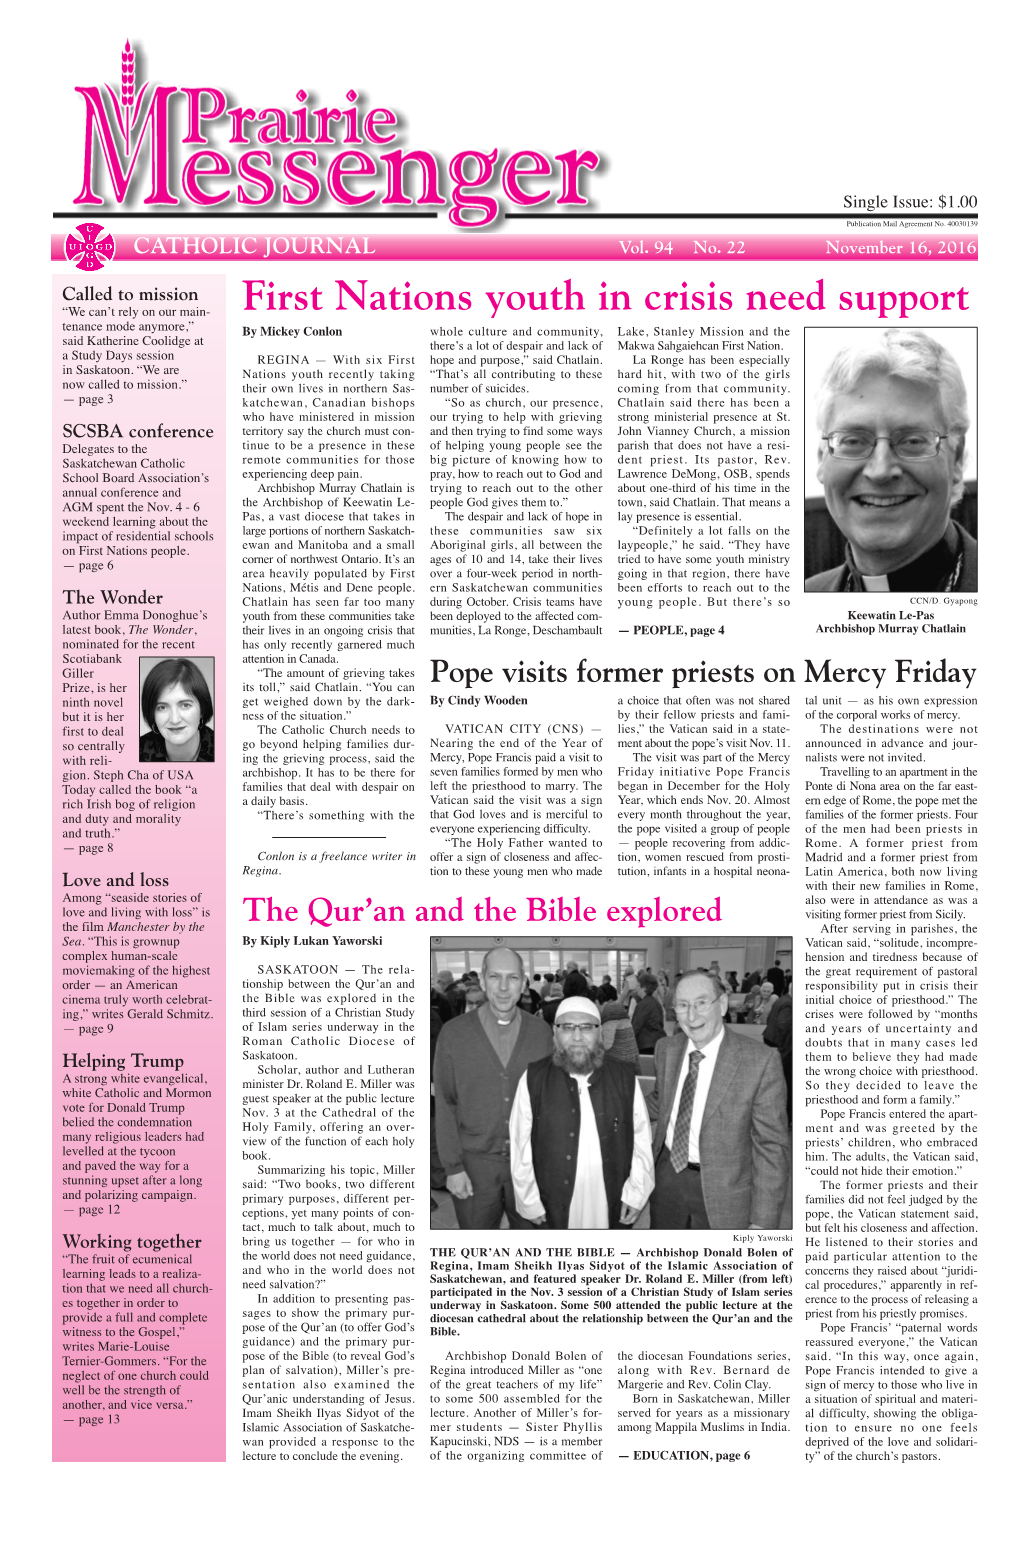 First Nations Youth in Crisis Need Support